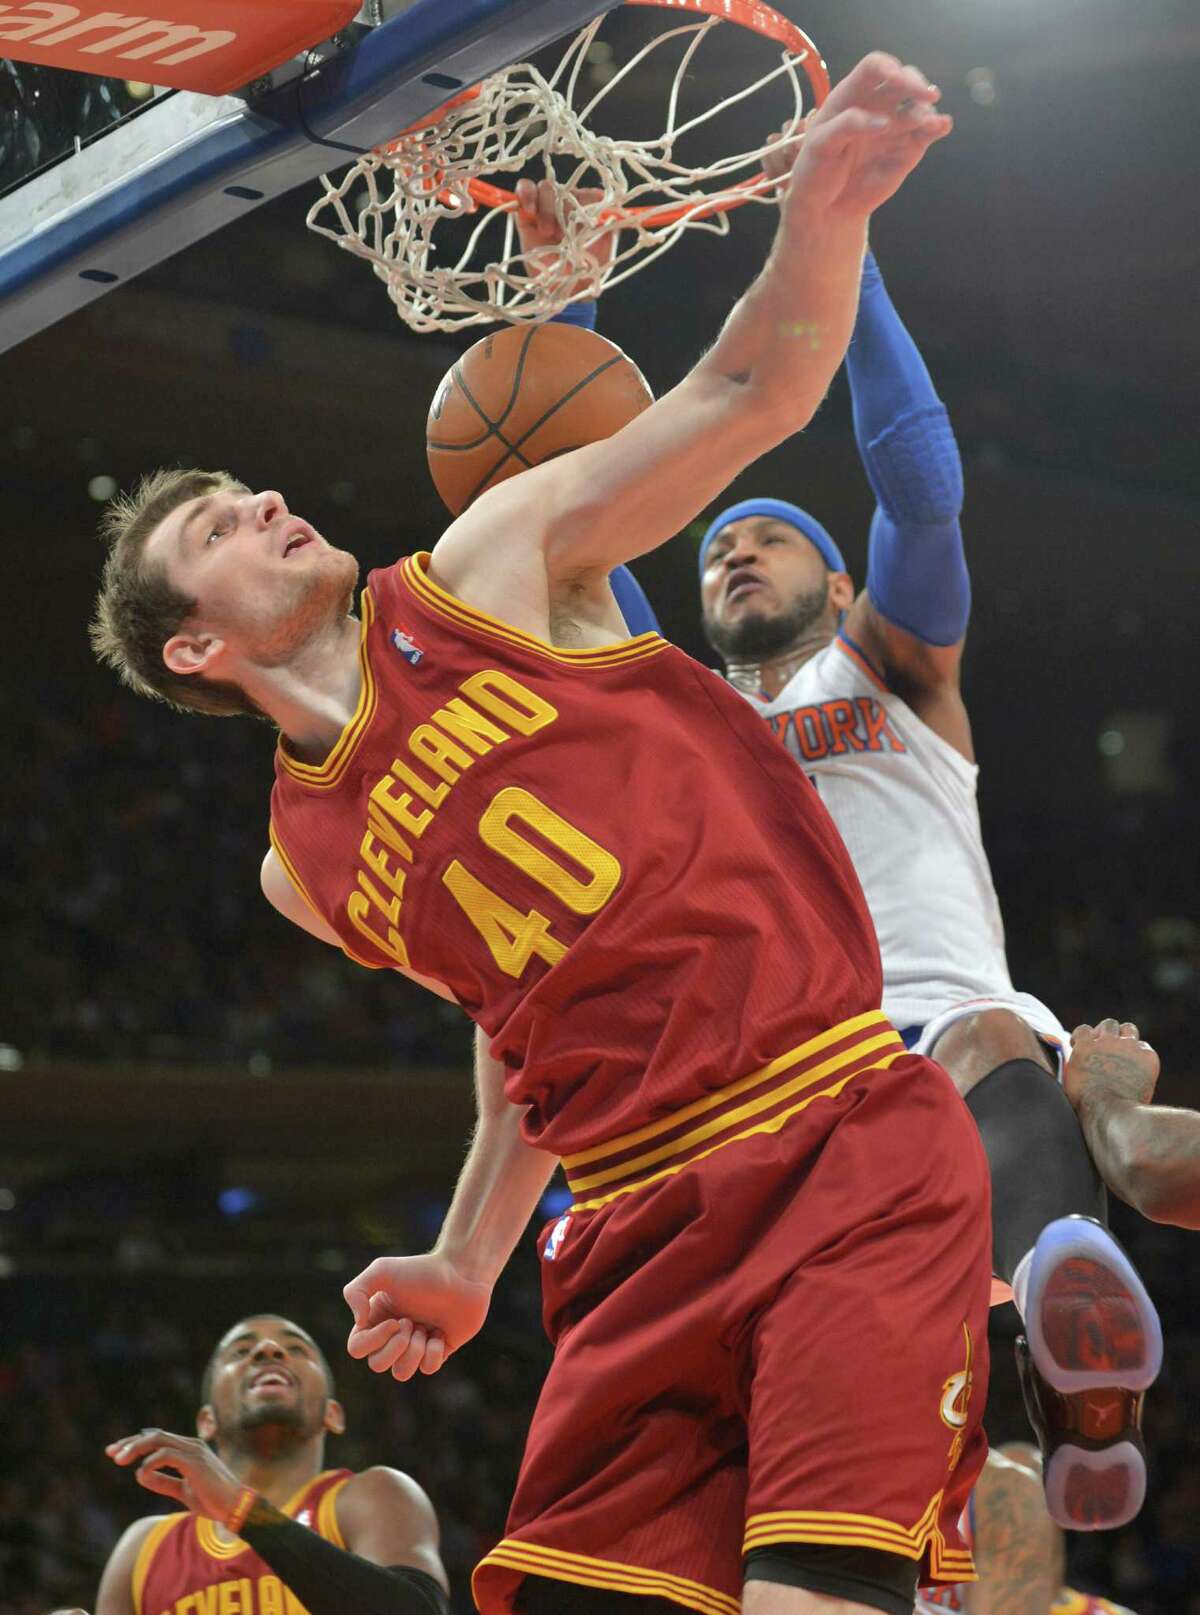 New York Knicks' Carmelo Anthony dunks the ball over Cleveland Cavaliers' Tyler Zeller (40) during the first quarter of an NBA basketball game Thursday, Jan. 30, 2014, at Madison Square Garden in New York. (AP Photo/Bill Kostroun) ORG XMIT: NYBK102